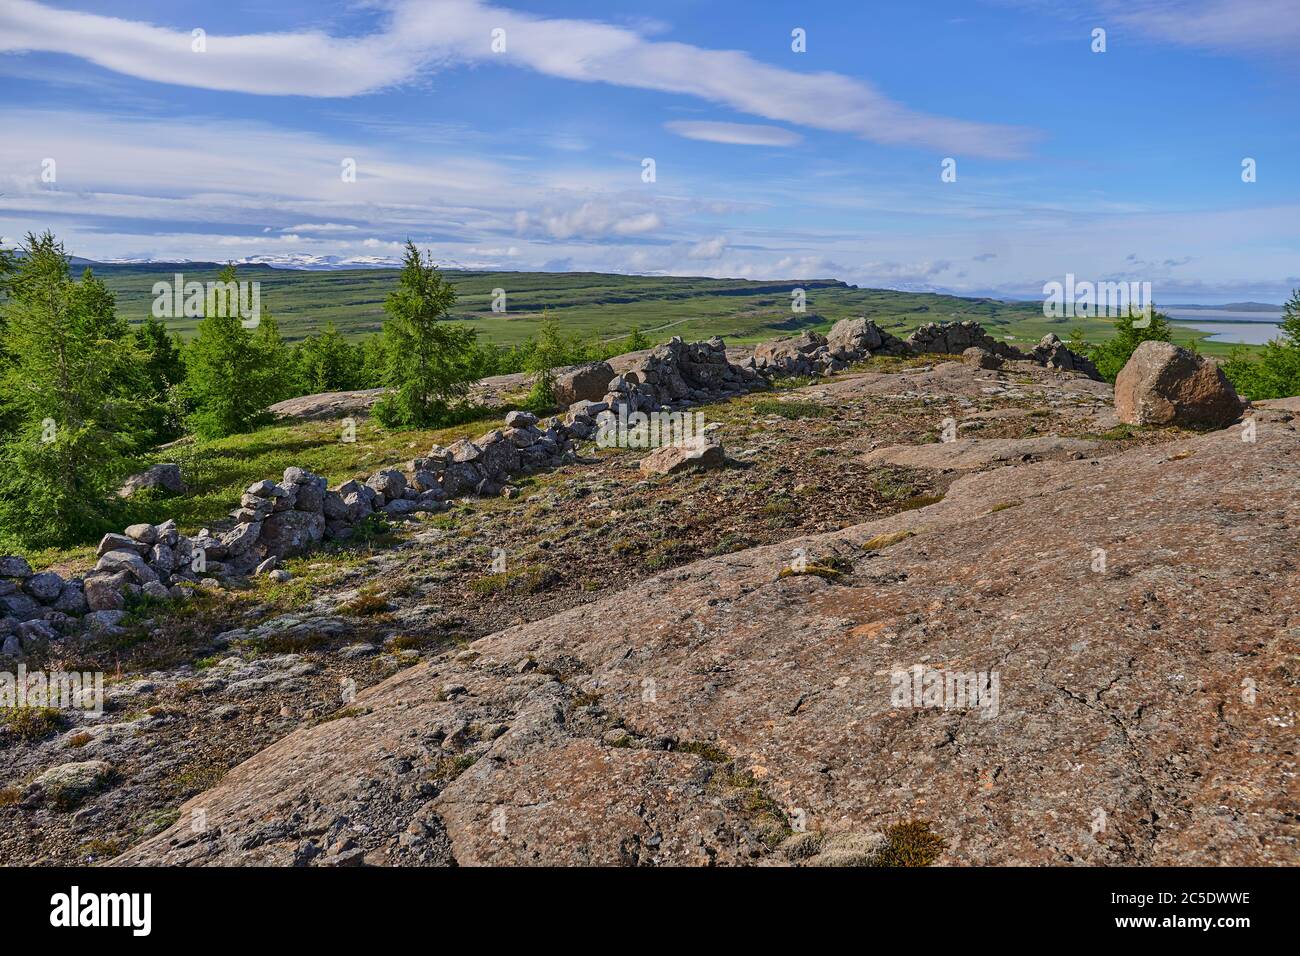 Basalt rock formations and trees by an old stone wall marking the border of Skógargerdi, a traditional farm by lake Lagarfljot in eastern Iceland Stock Photo